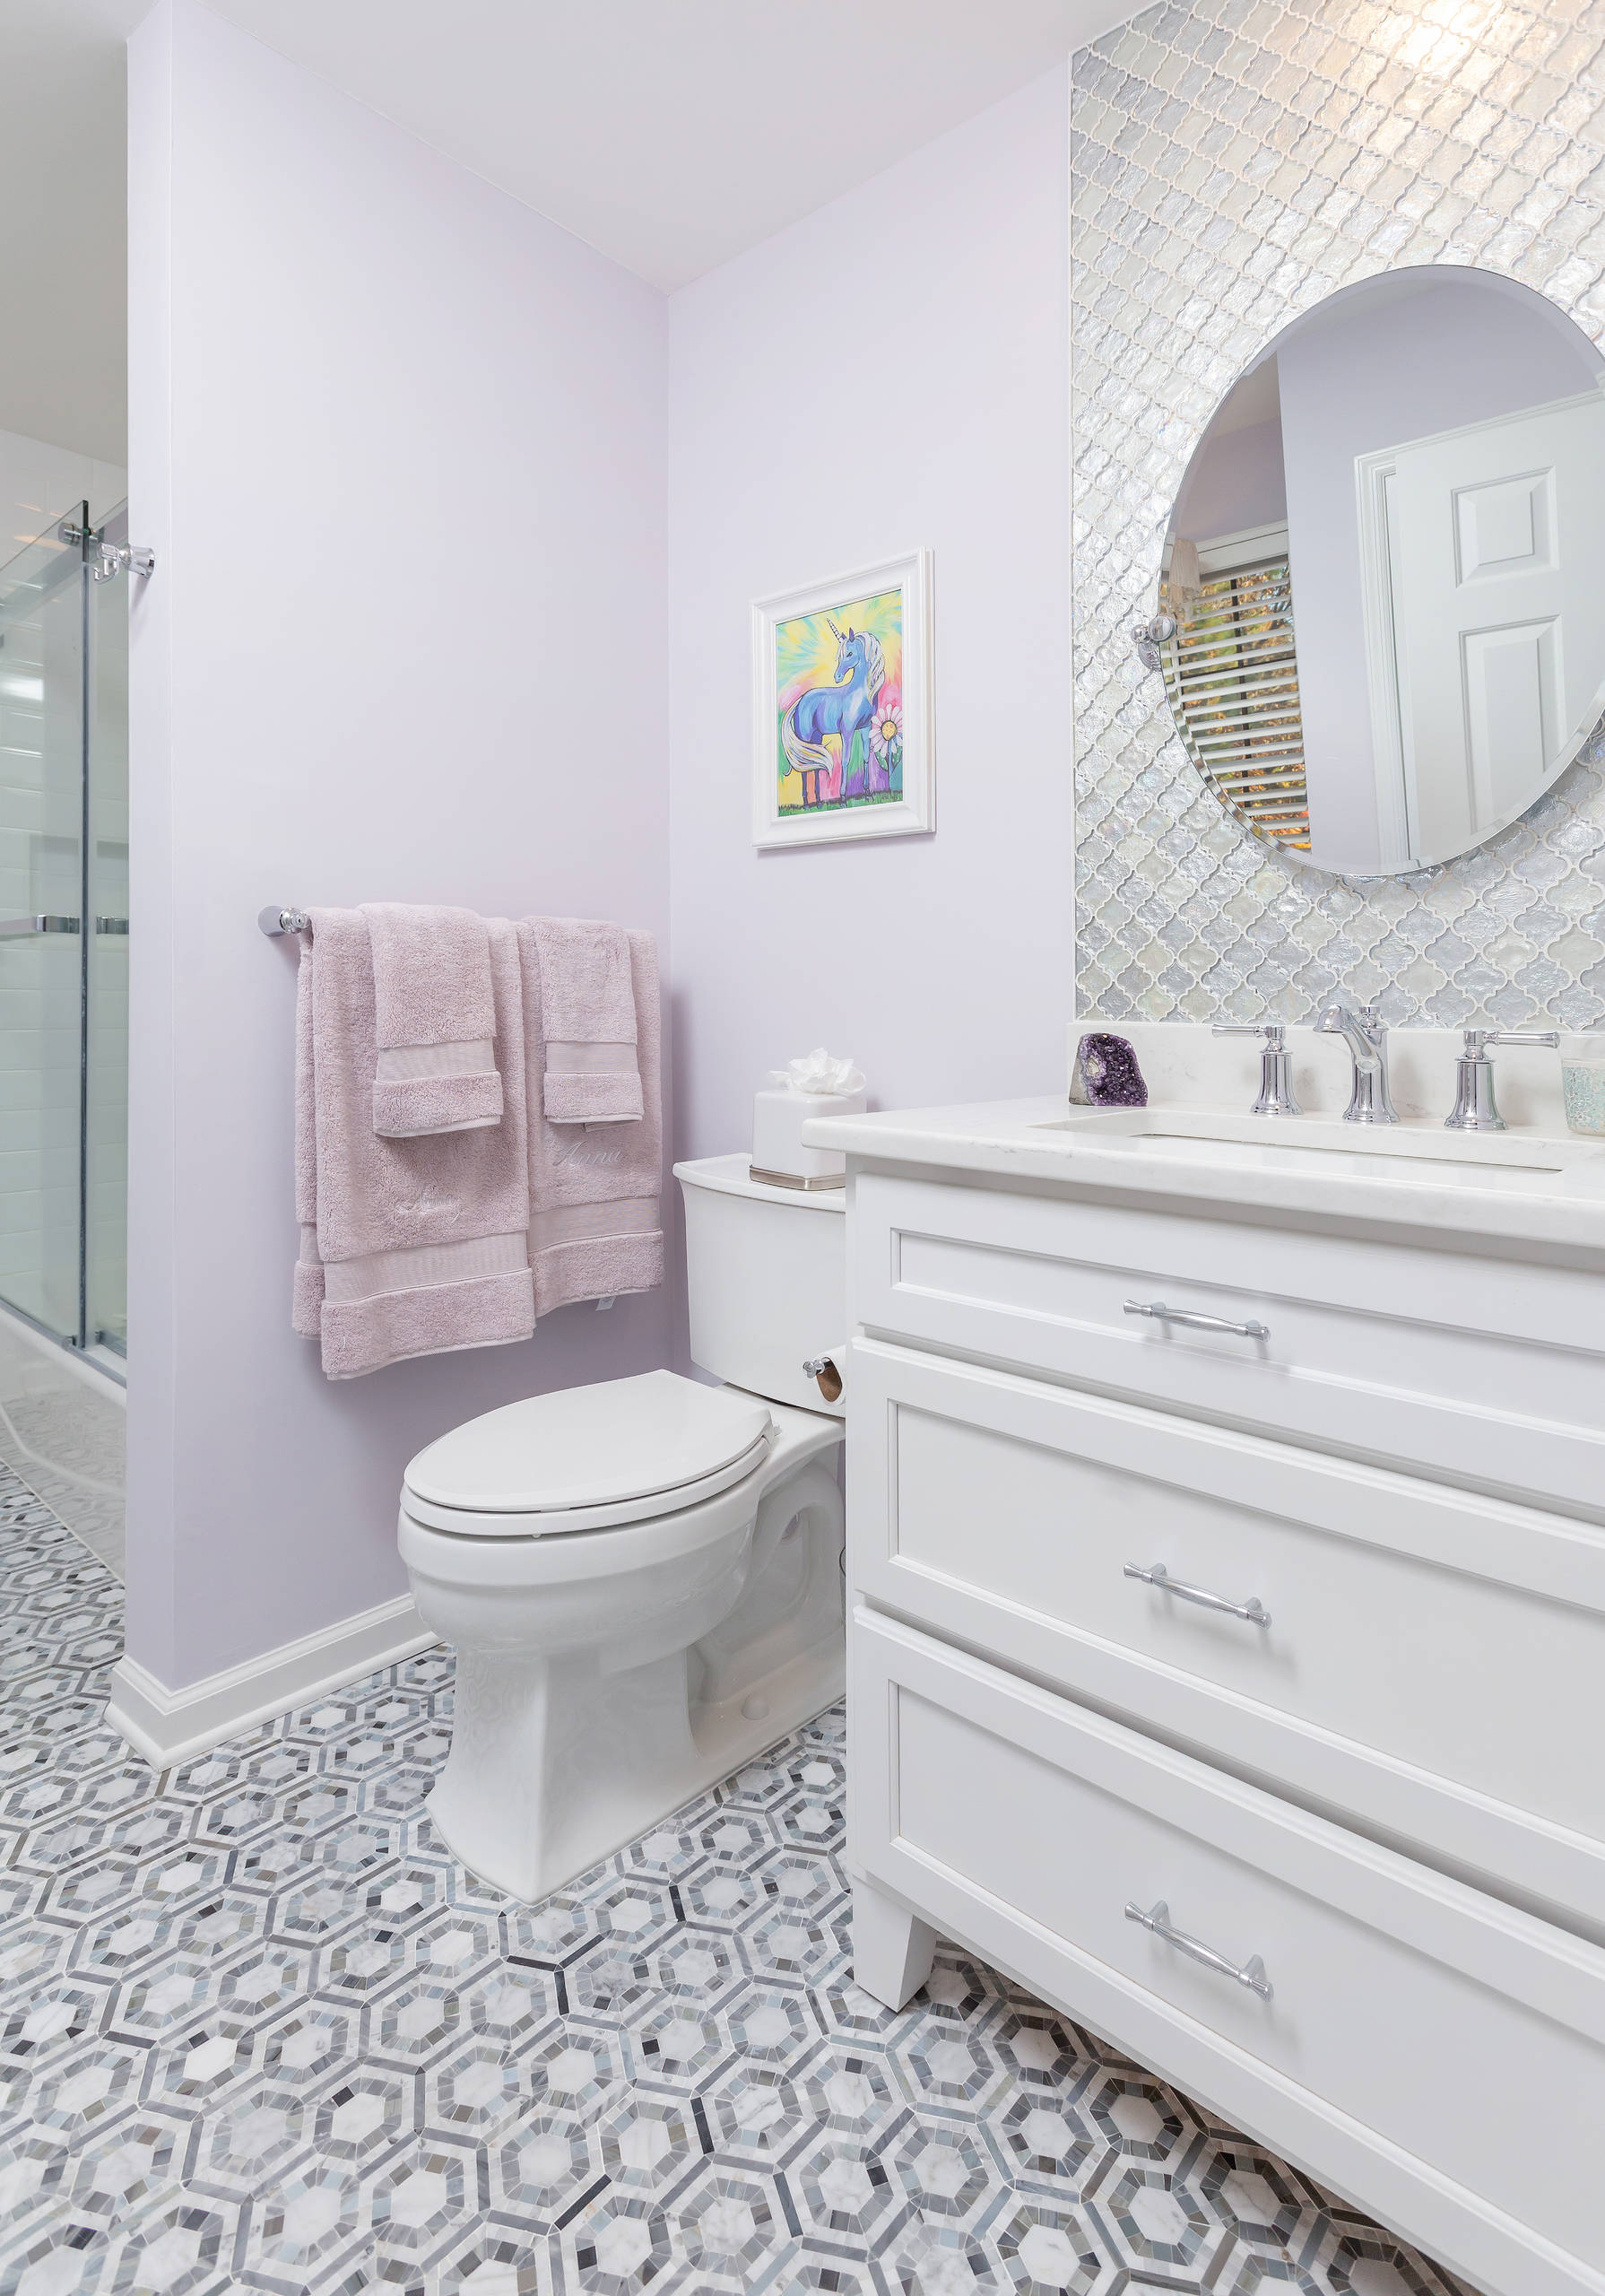 https://st.hzcdn.com/simgs/pictures/bathrooms/girls-bathroom-voorhees-cipriani-remodeling-solutions-img~e4a135d00cc352c7_14-0634-1-d5c9532.jpg